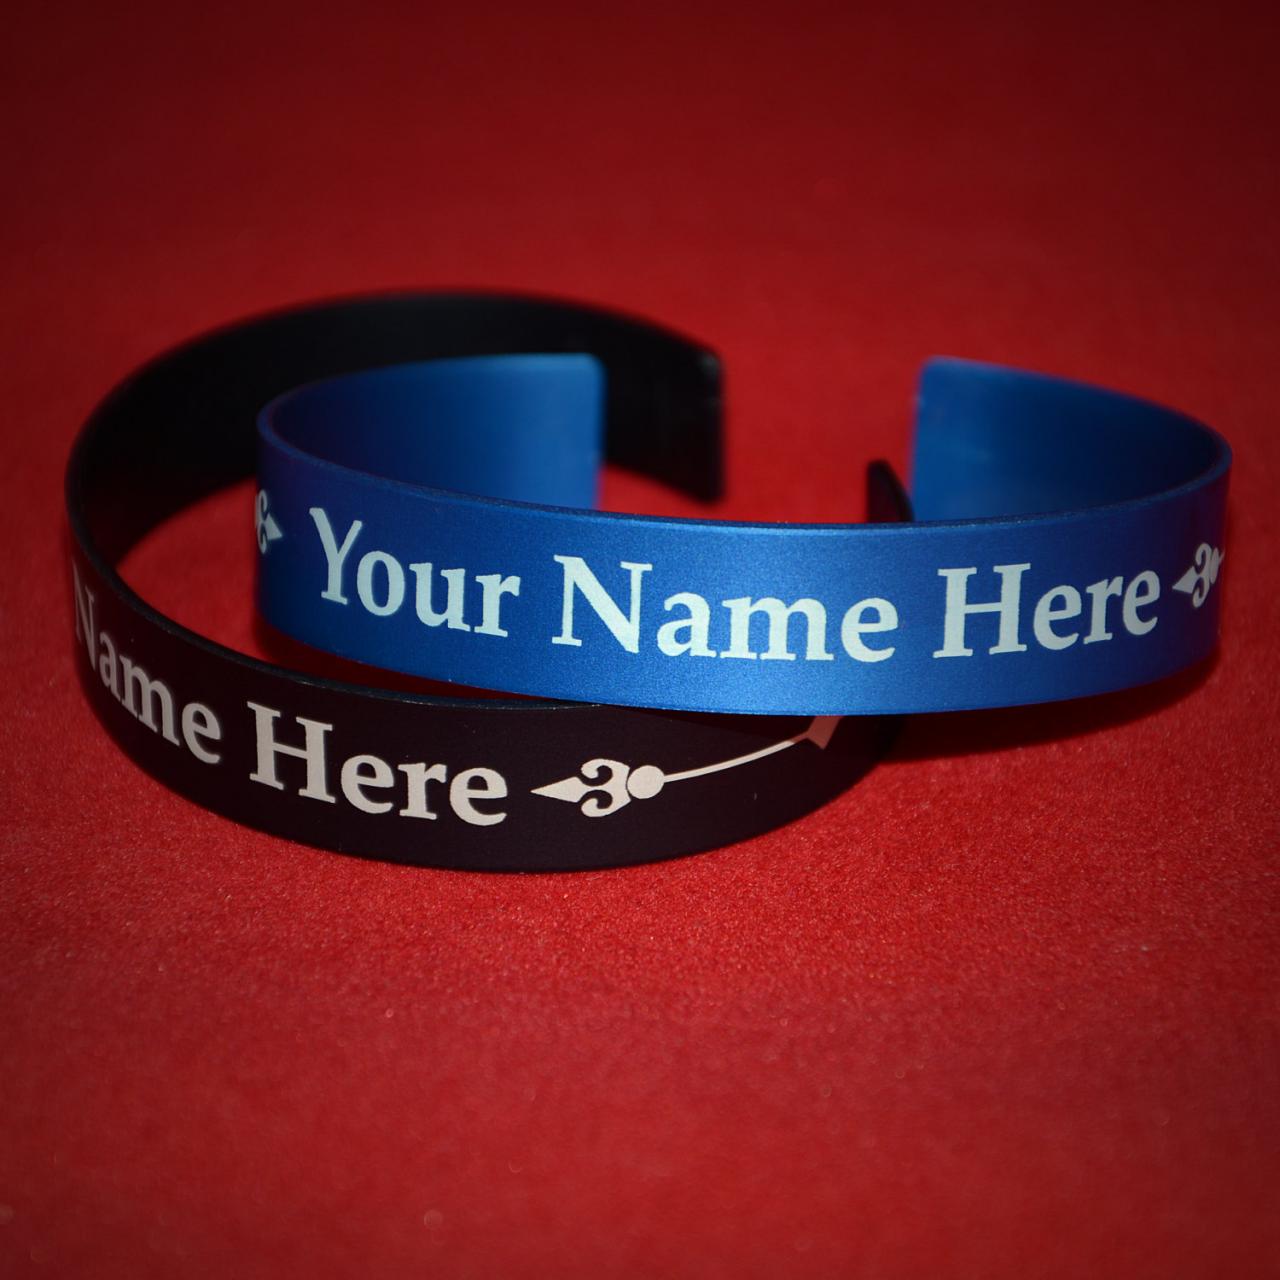 Your Name Bracelet - High Quality Anodized Aluminum Bracelet Made Just For You